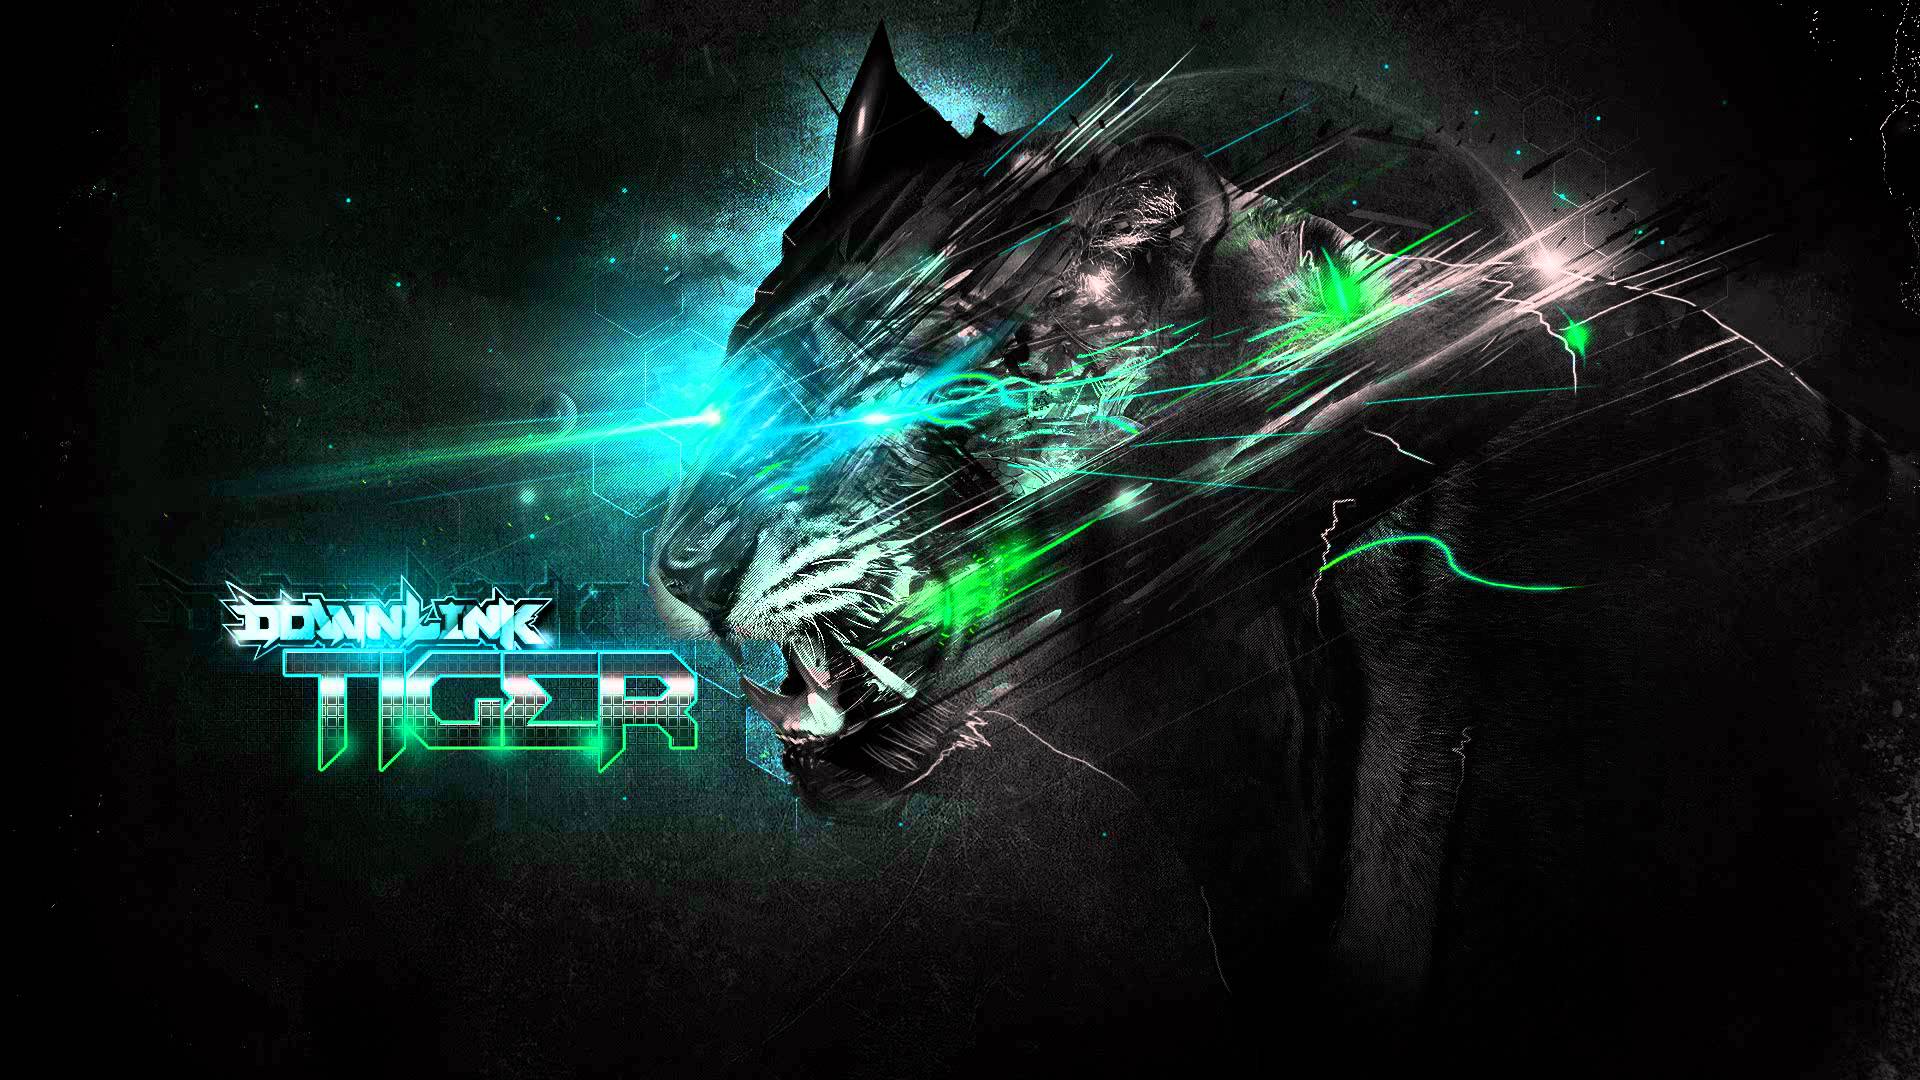 Free download Excision Wallpaper HD Maxresdefaultjpg 1920x1080